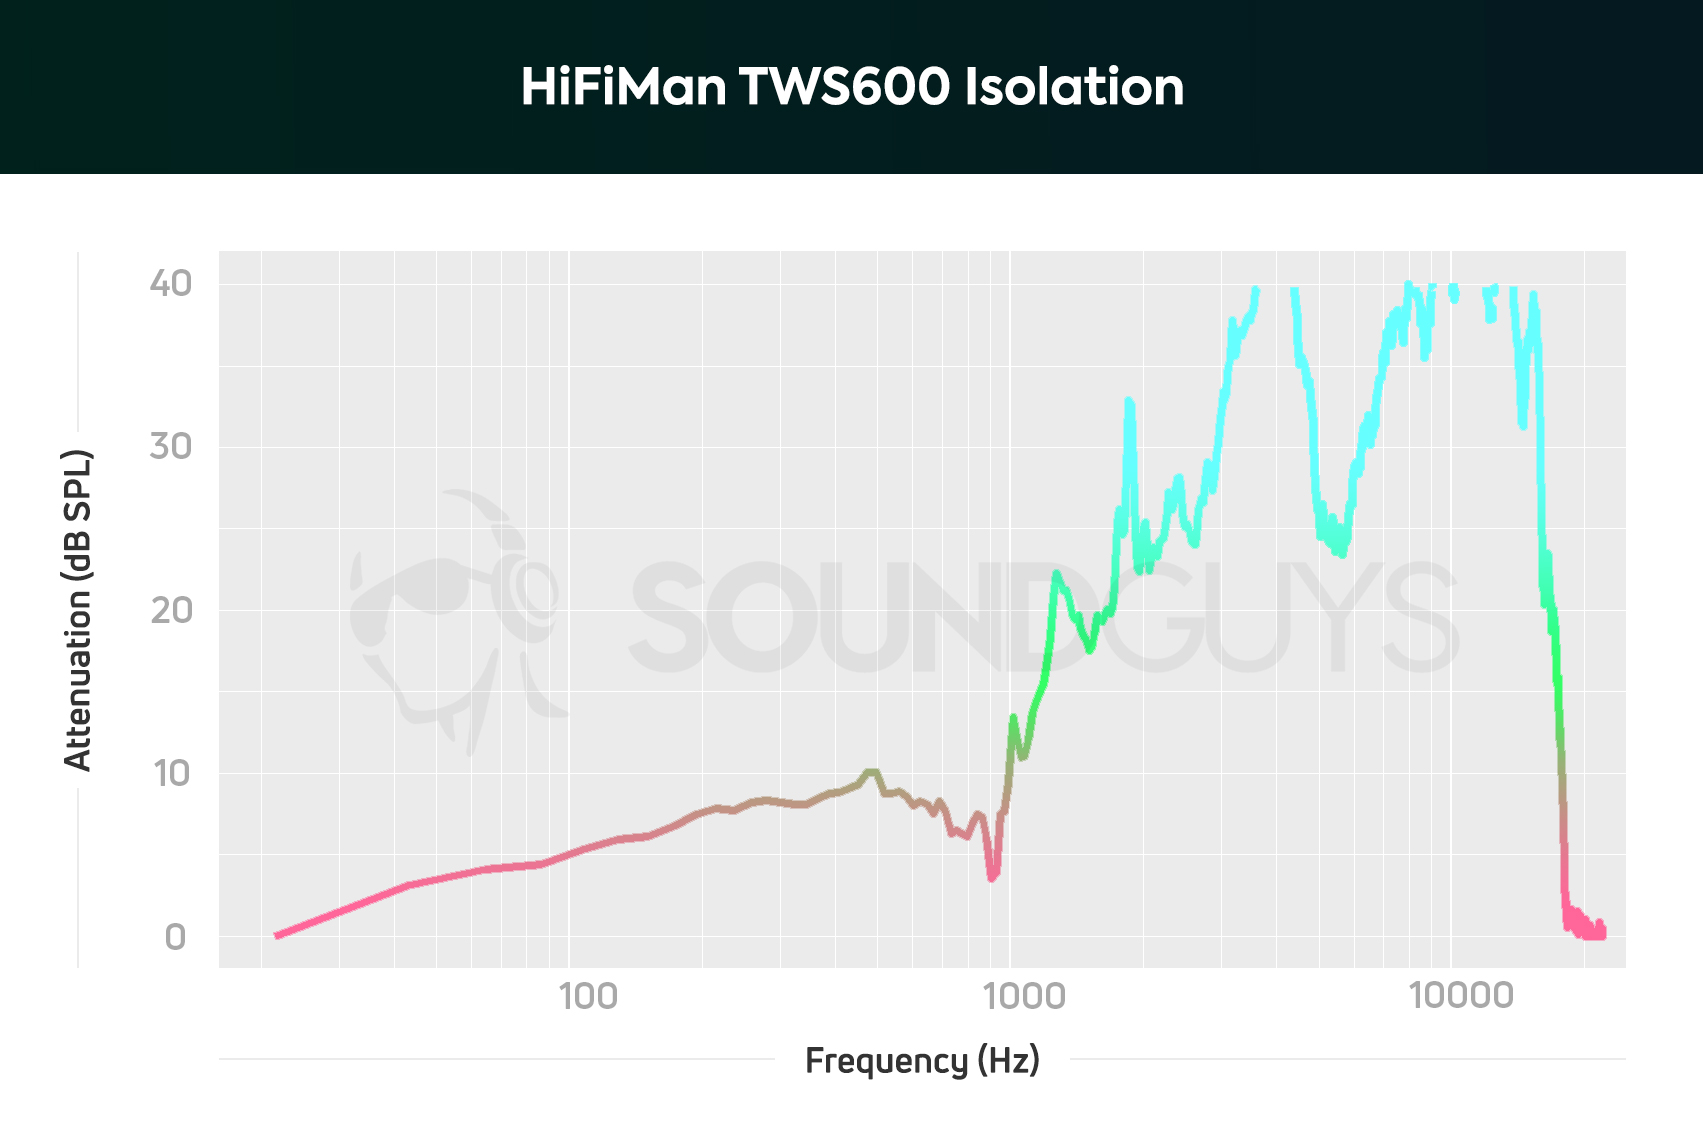 A chart depicting the HiFiMan TWS600 true wireless earbuds' isolation, which is better than most sub-$100 earbuds.